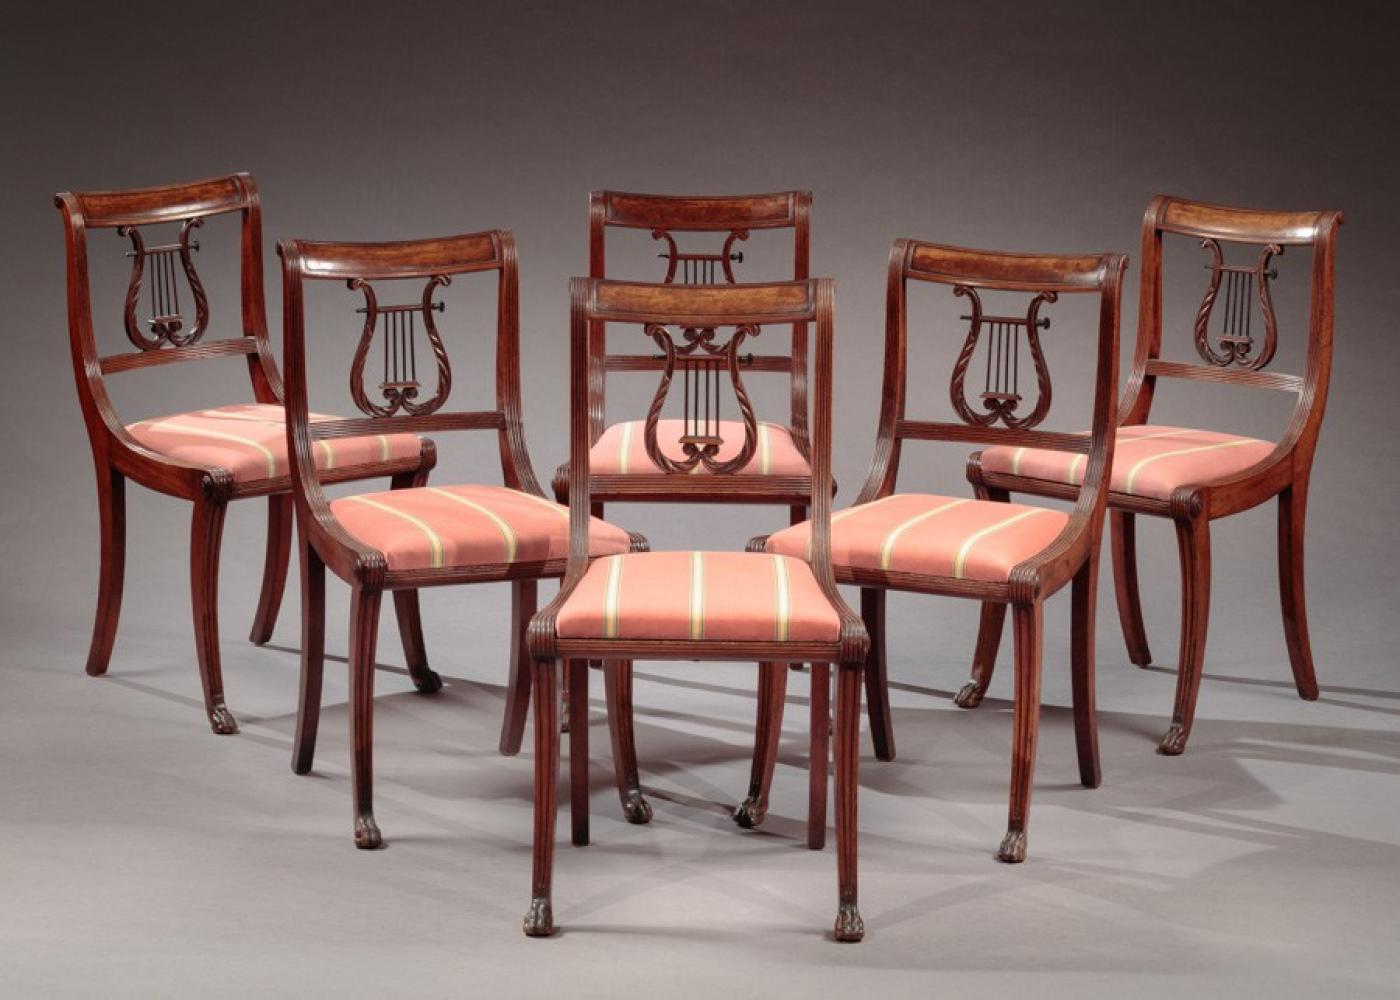 Duncan Phyfe Lyre Back Dining Room Chairs